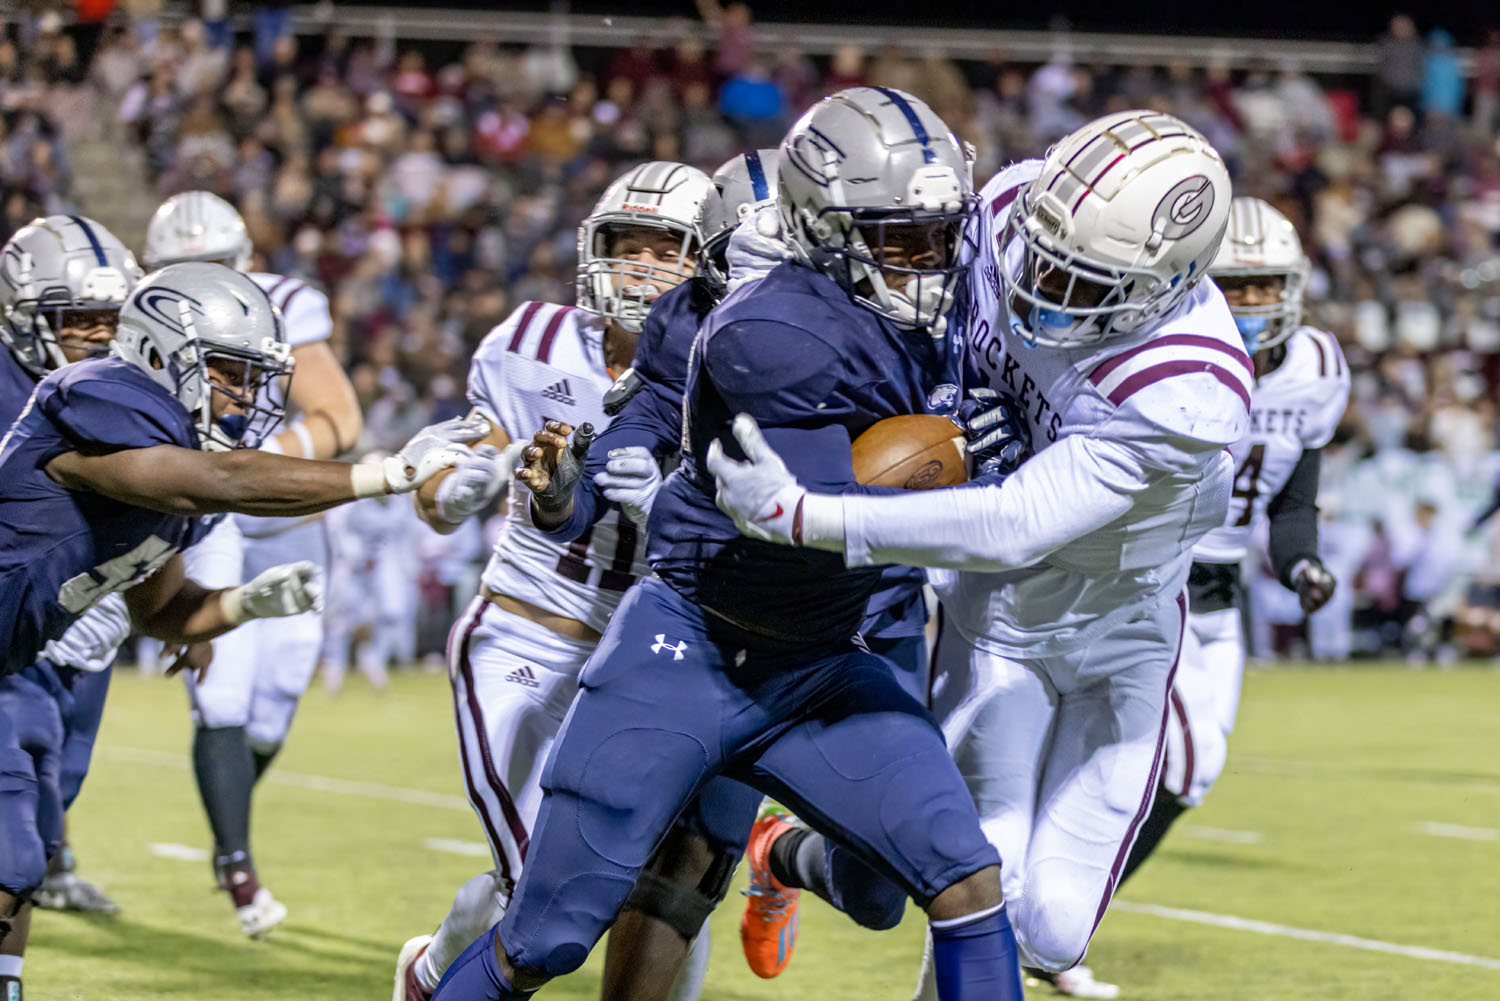 Team of the Week: Clay-Chalkville rises to Gardendale challenge